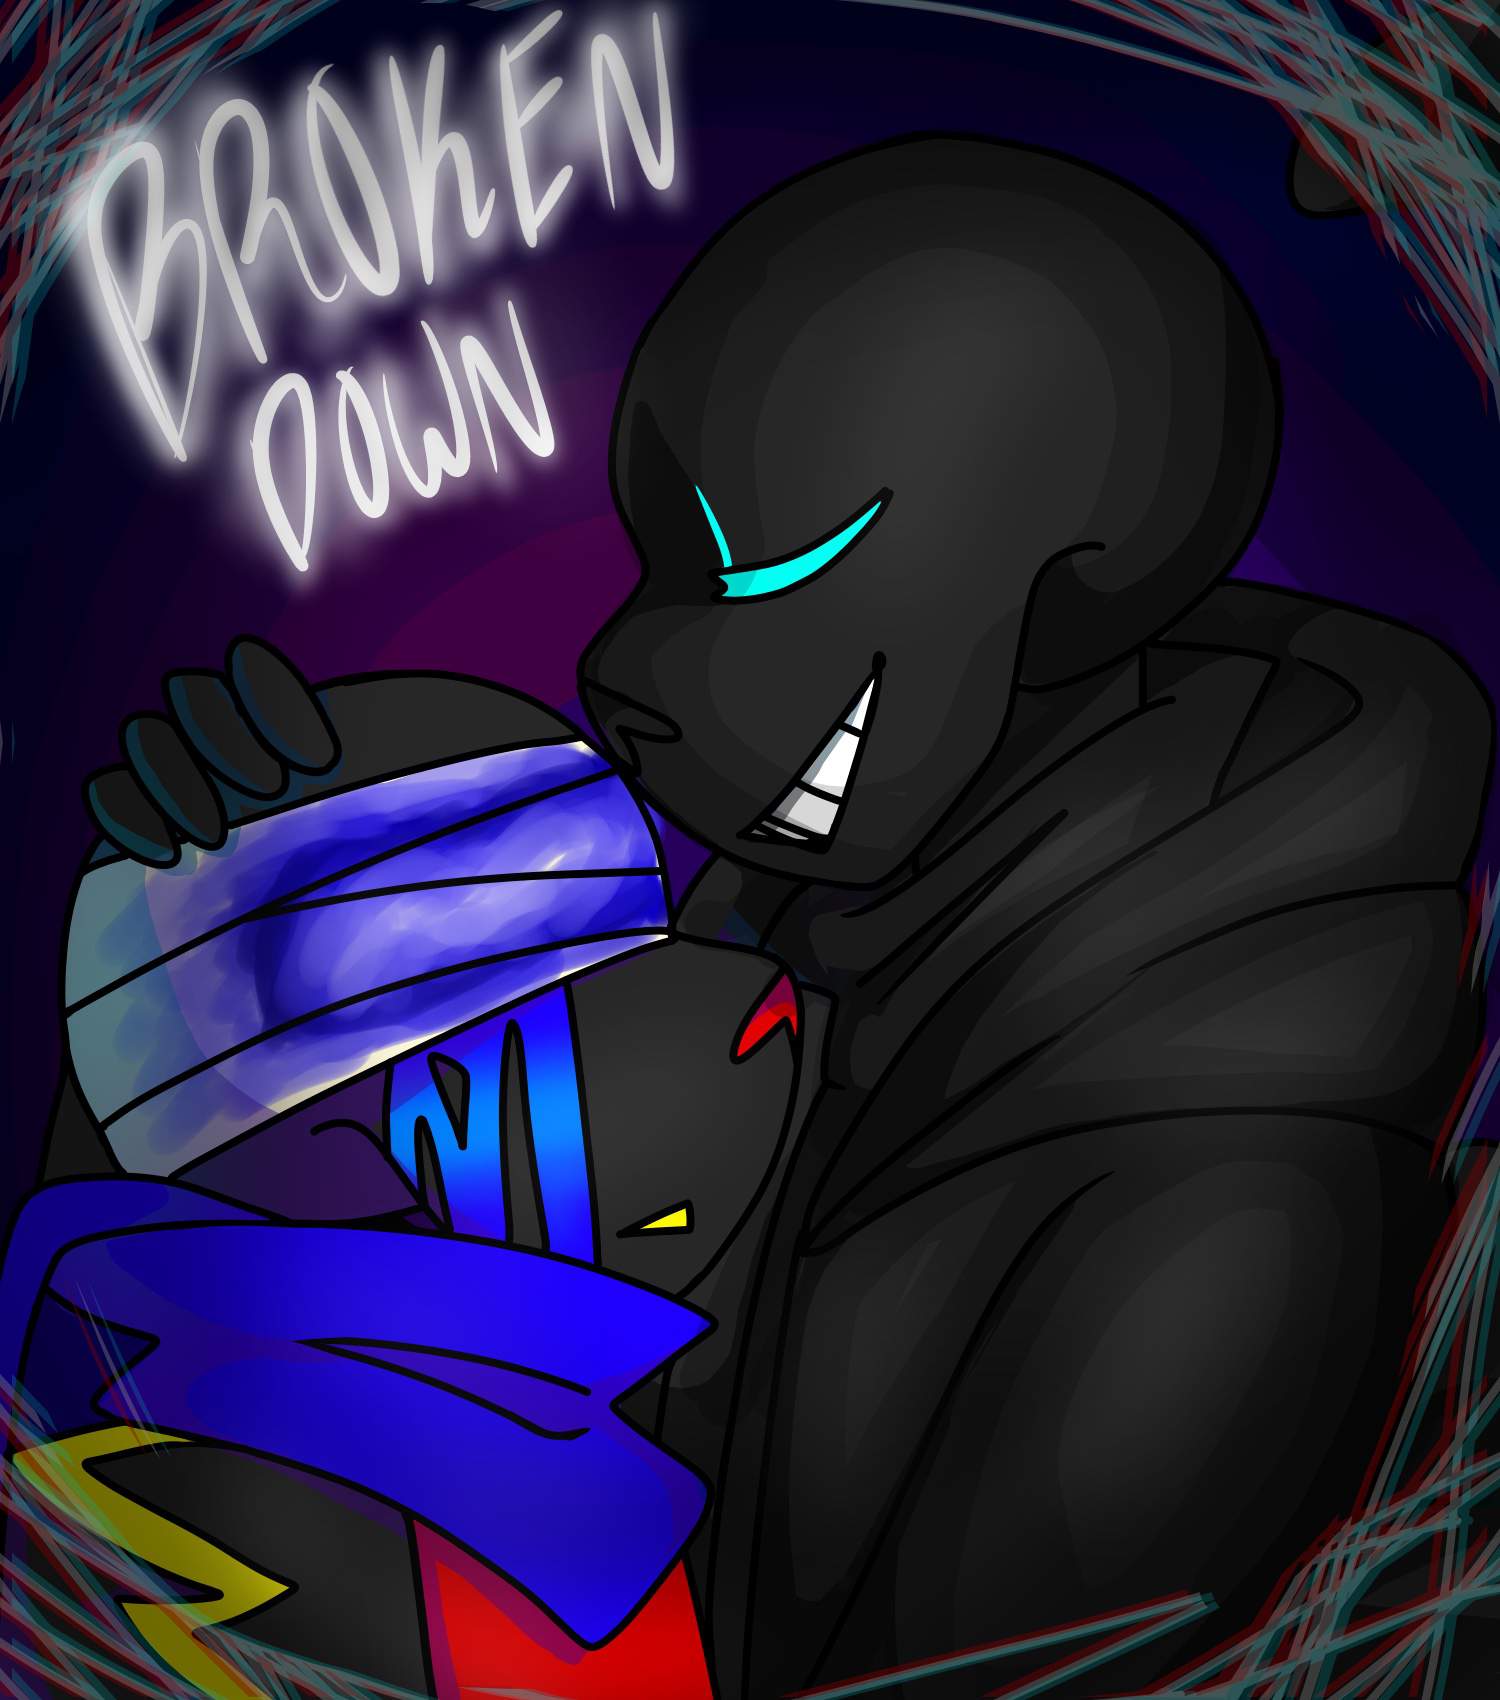 Broken Down Chapter 4 New Cover Undertale Aus Amino